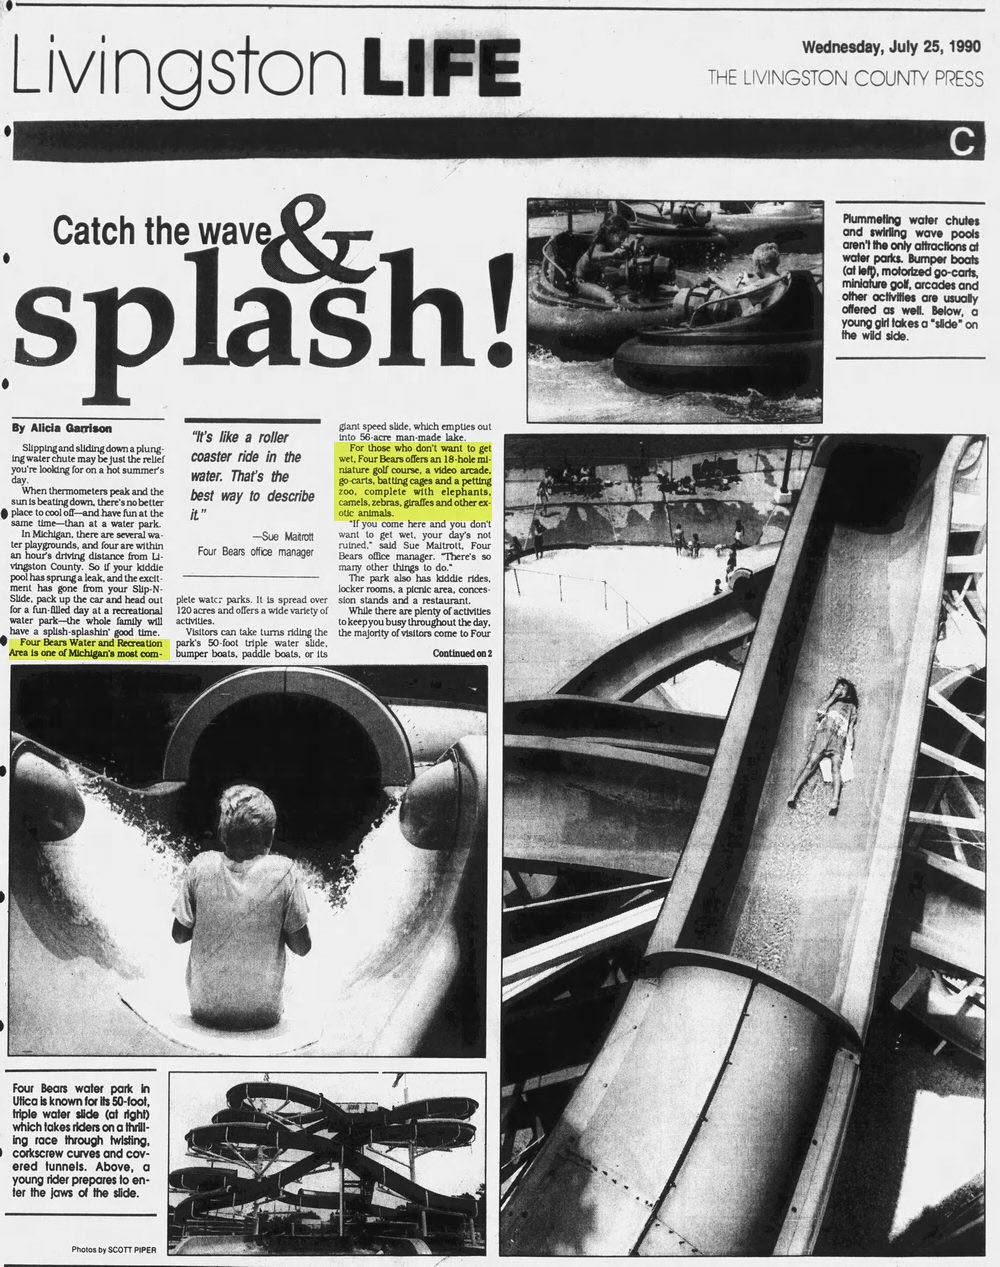 Michigan Water World - 1990 ARTICLE FROM LIVINGTSON COUNTY PRESS